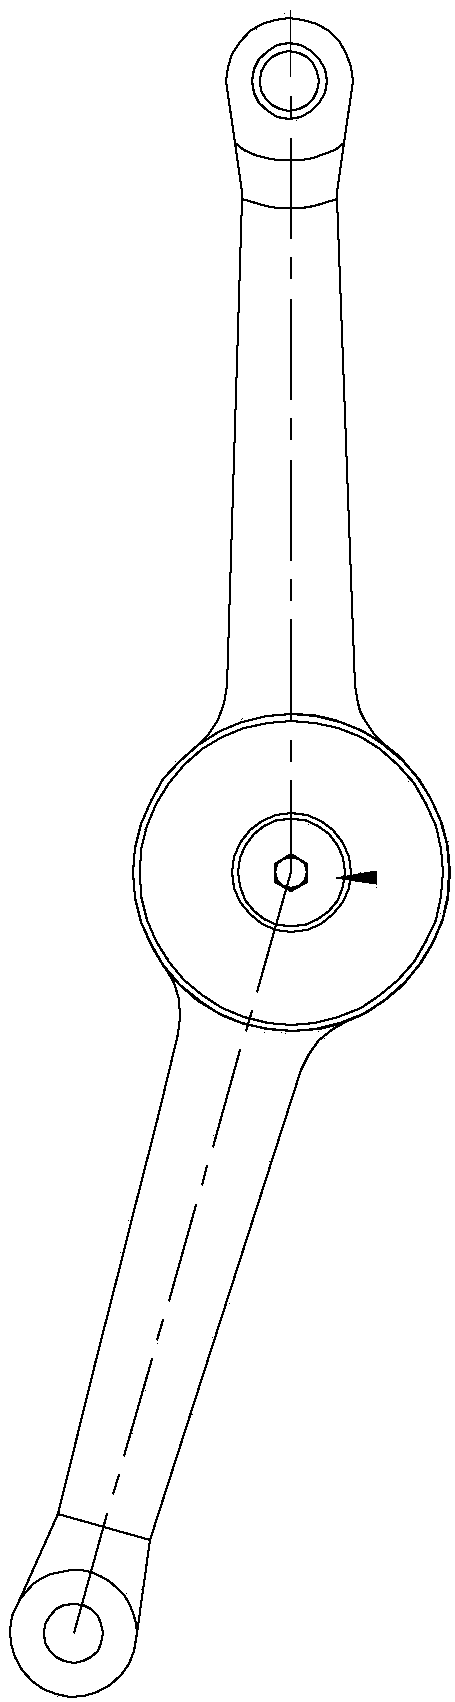 Wearable supporting arm device